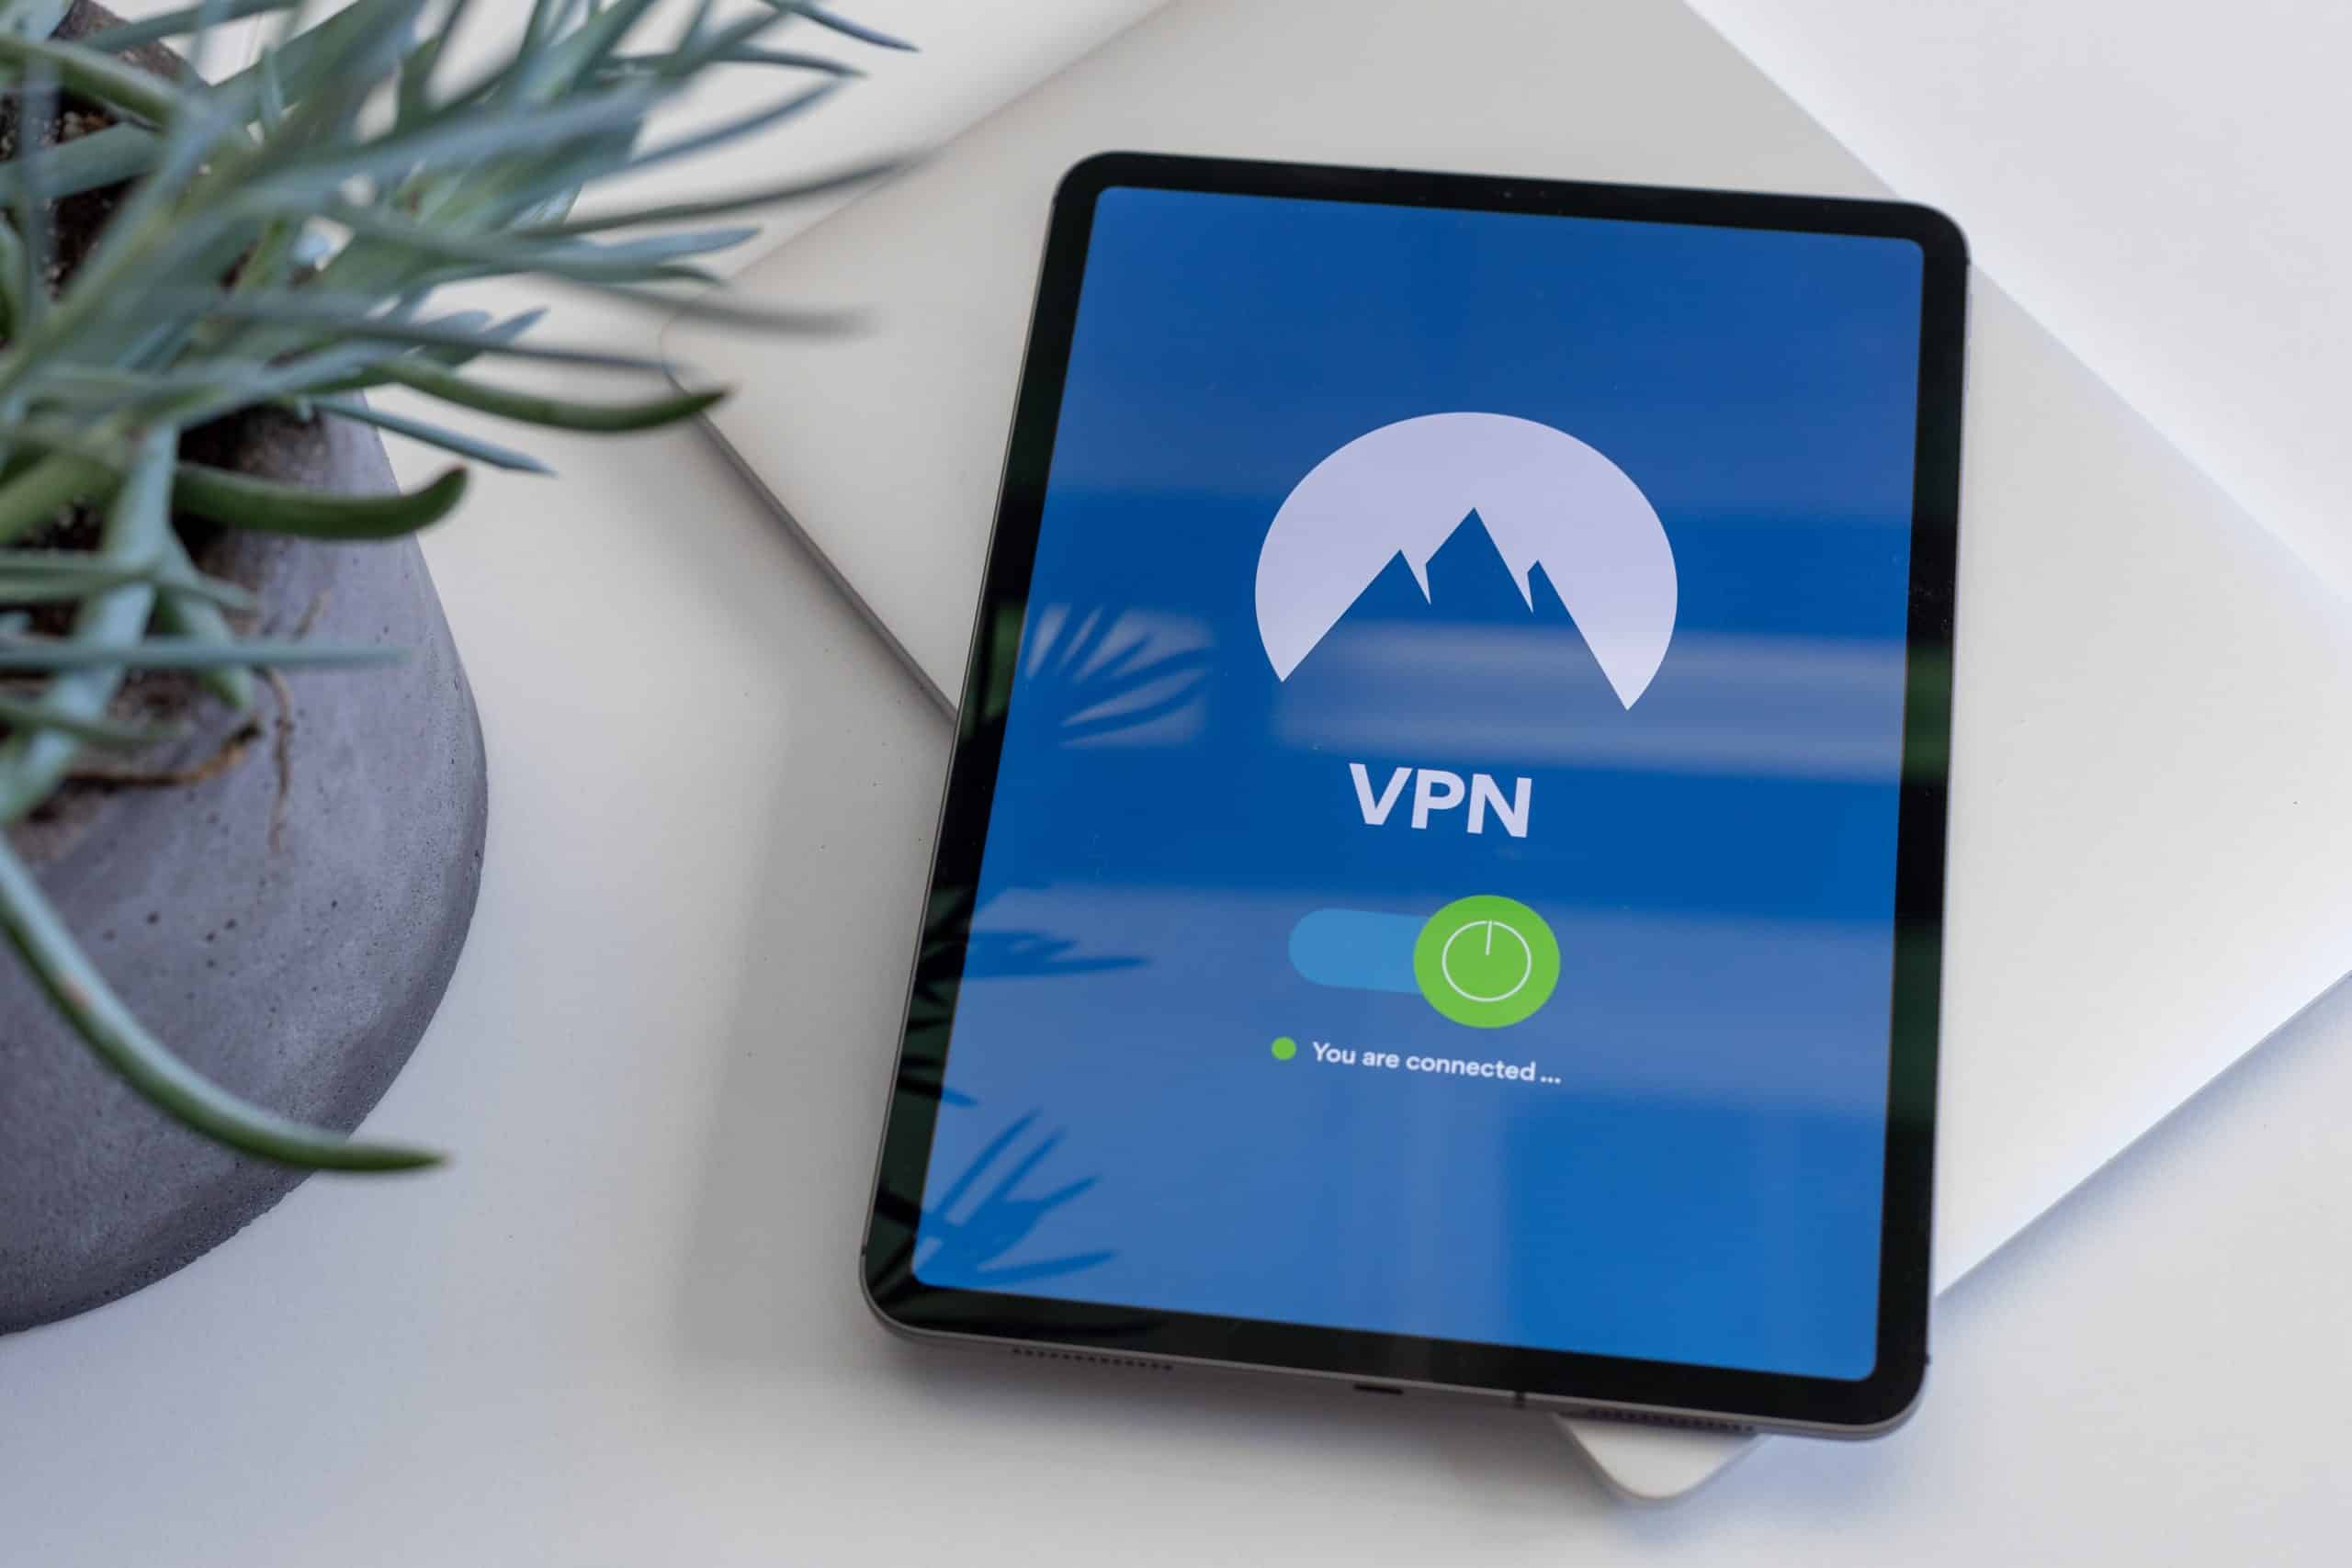 Always use a VPN when trading crypto!